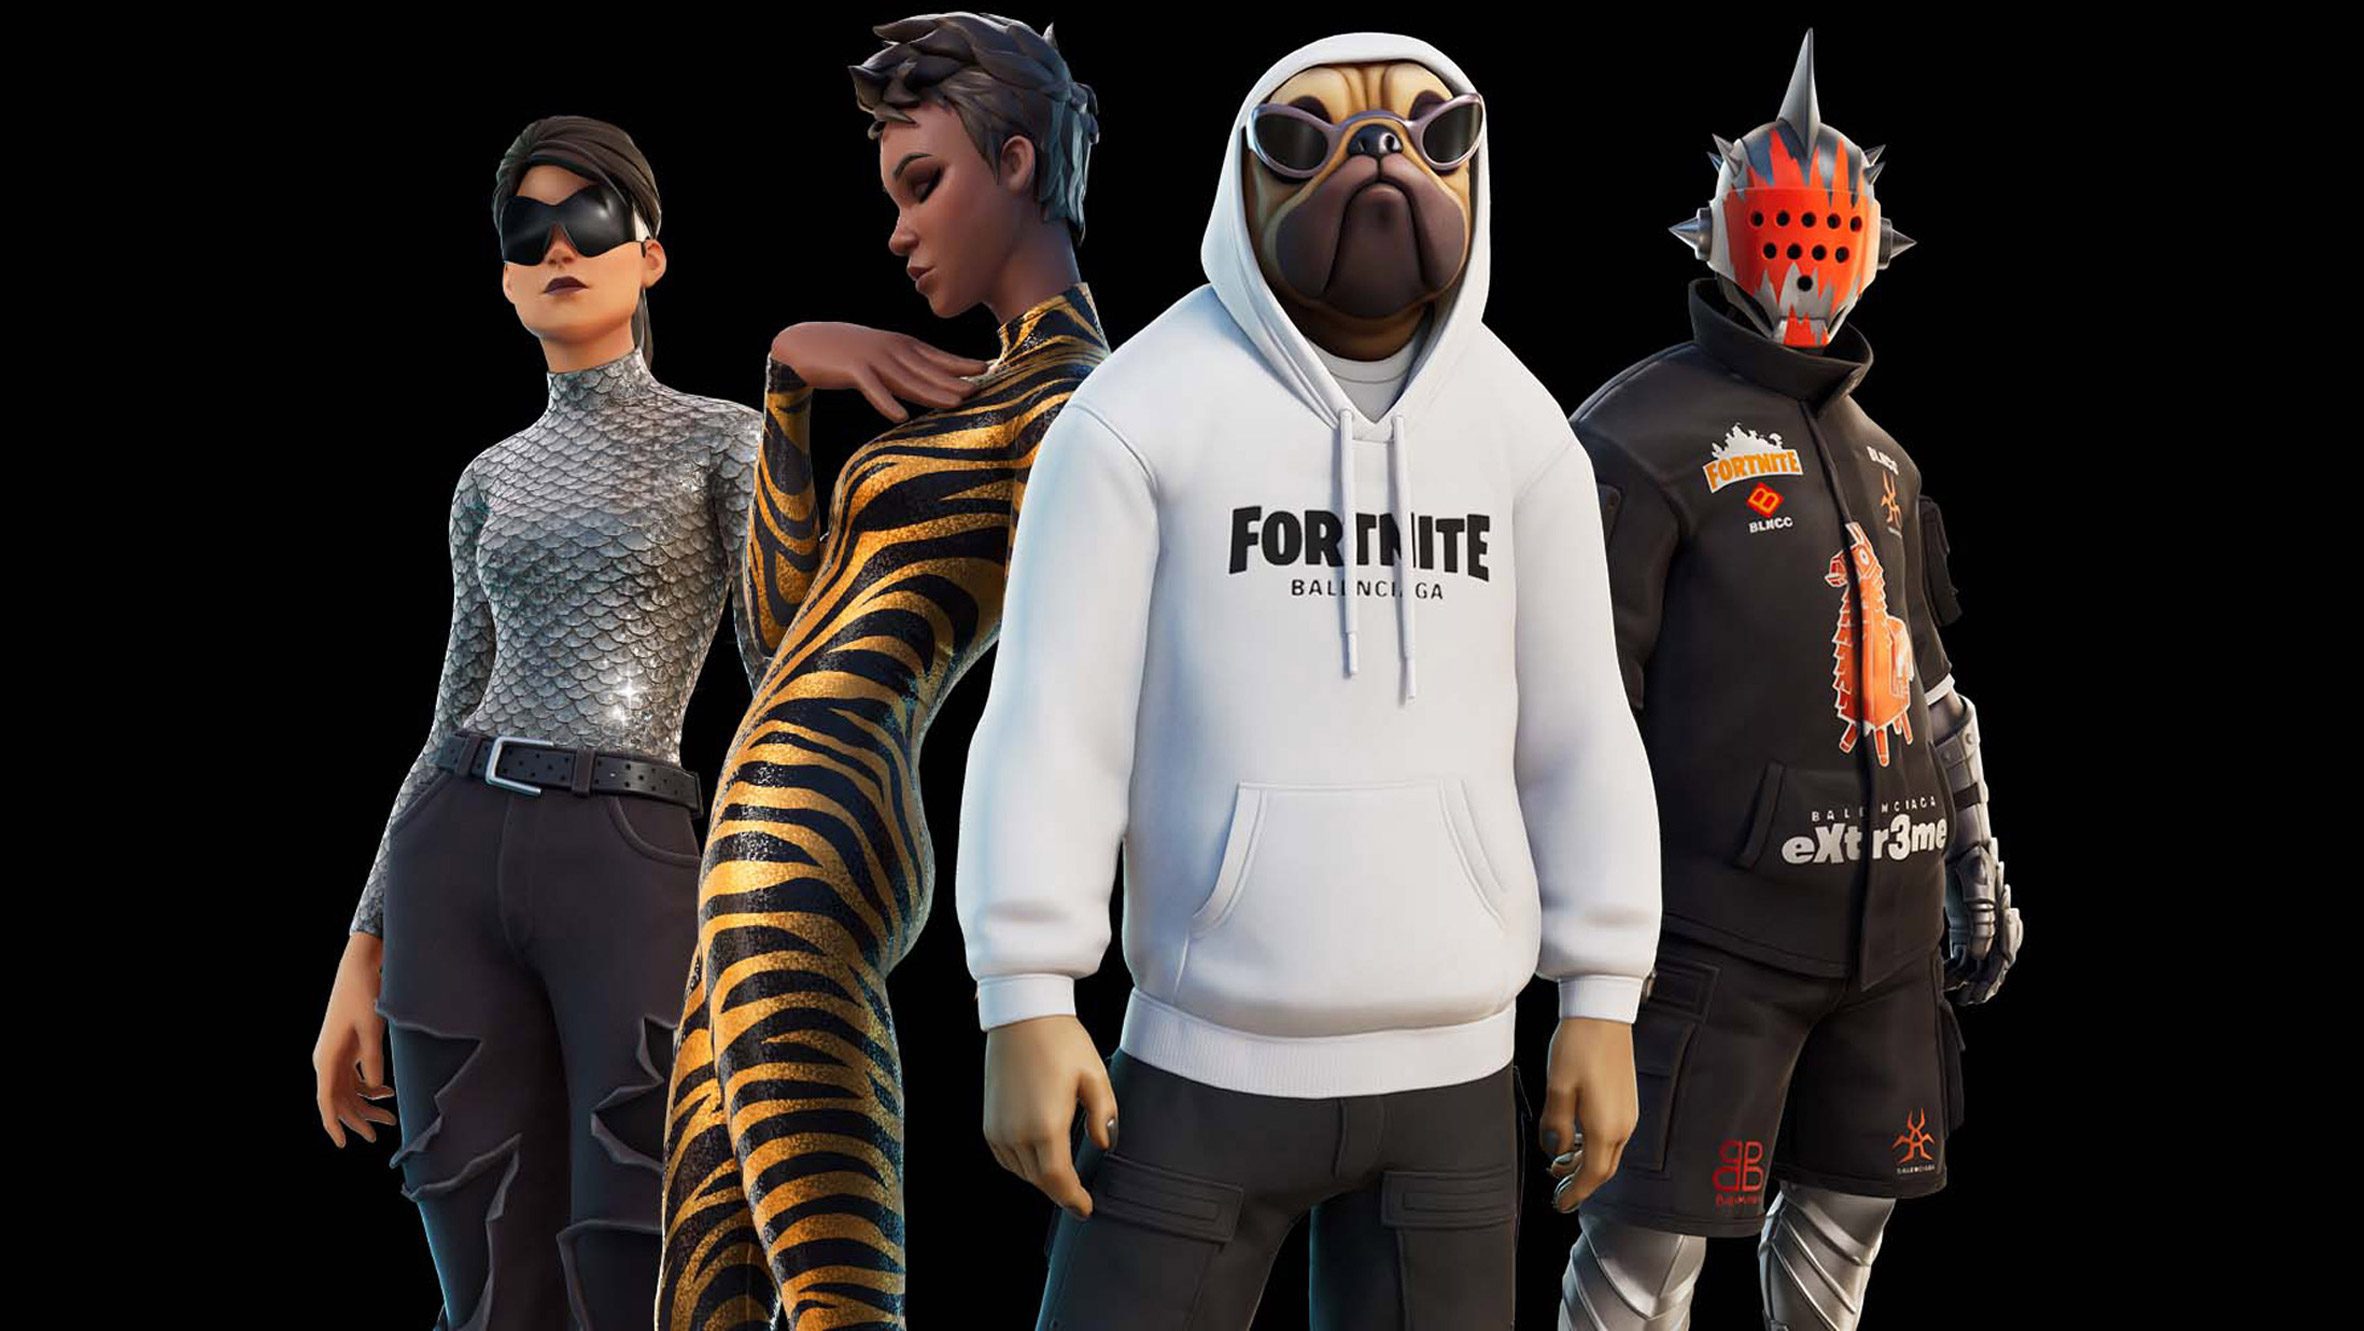 Fashion Cool Graphic Clothes Fortnite Full Print Hoodie With Pants